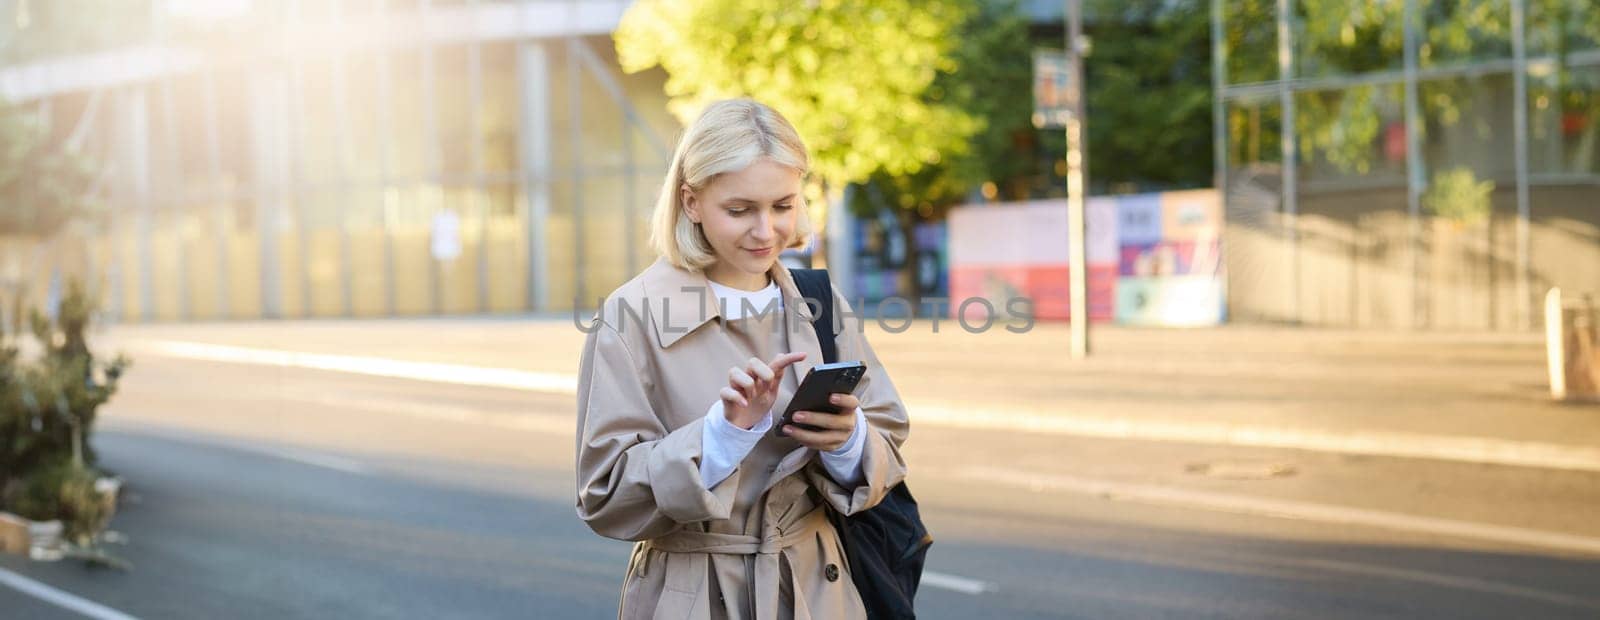 Image of young woman on street, carries backpack, looks at her smartphone, using carsharing application, orders taxi, sends a message on mobile app.